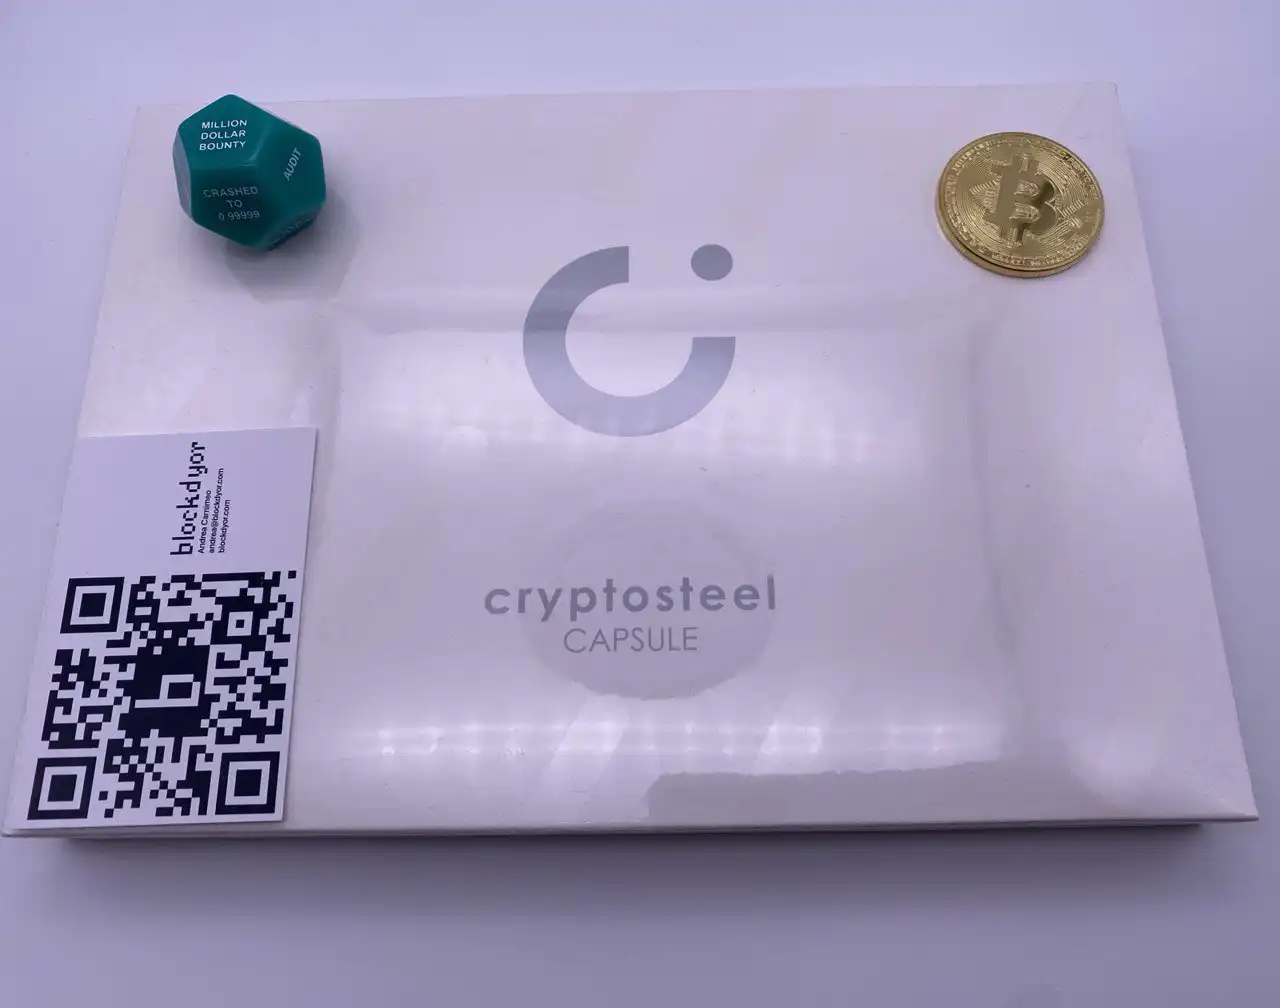 Cryptosteel Capsule Unboxing Step 1